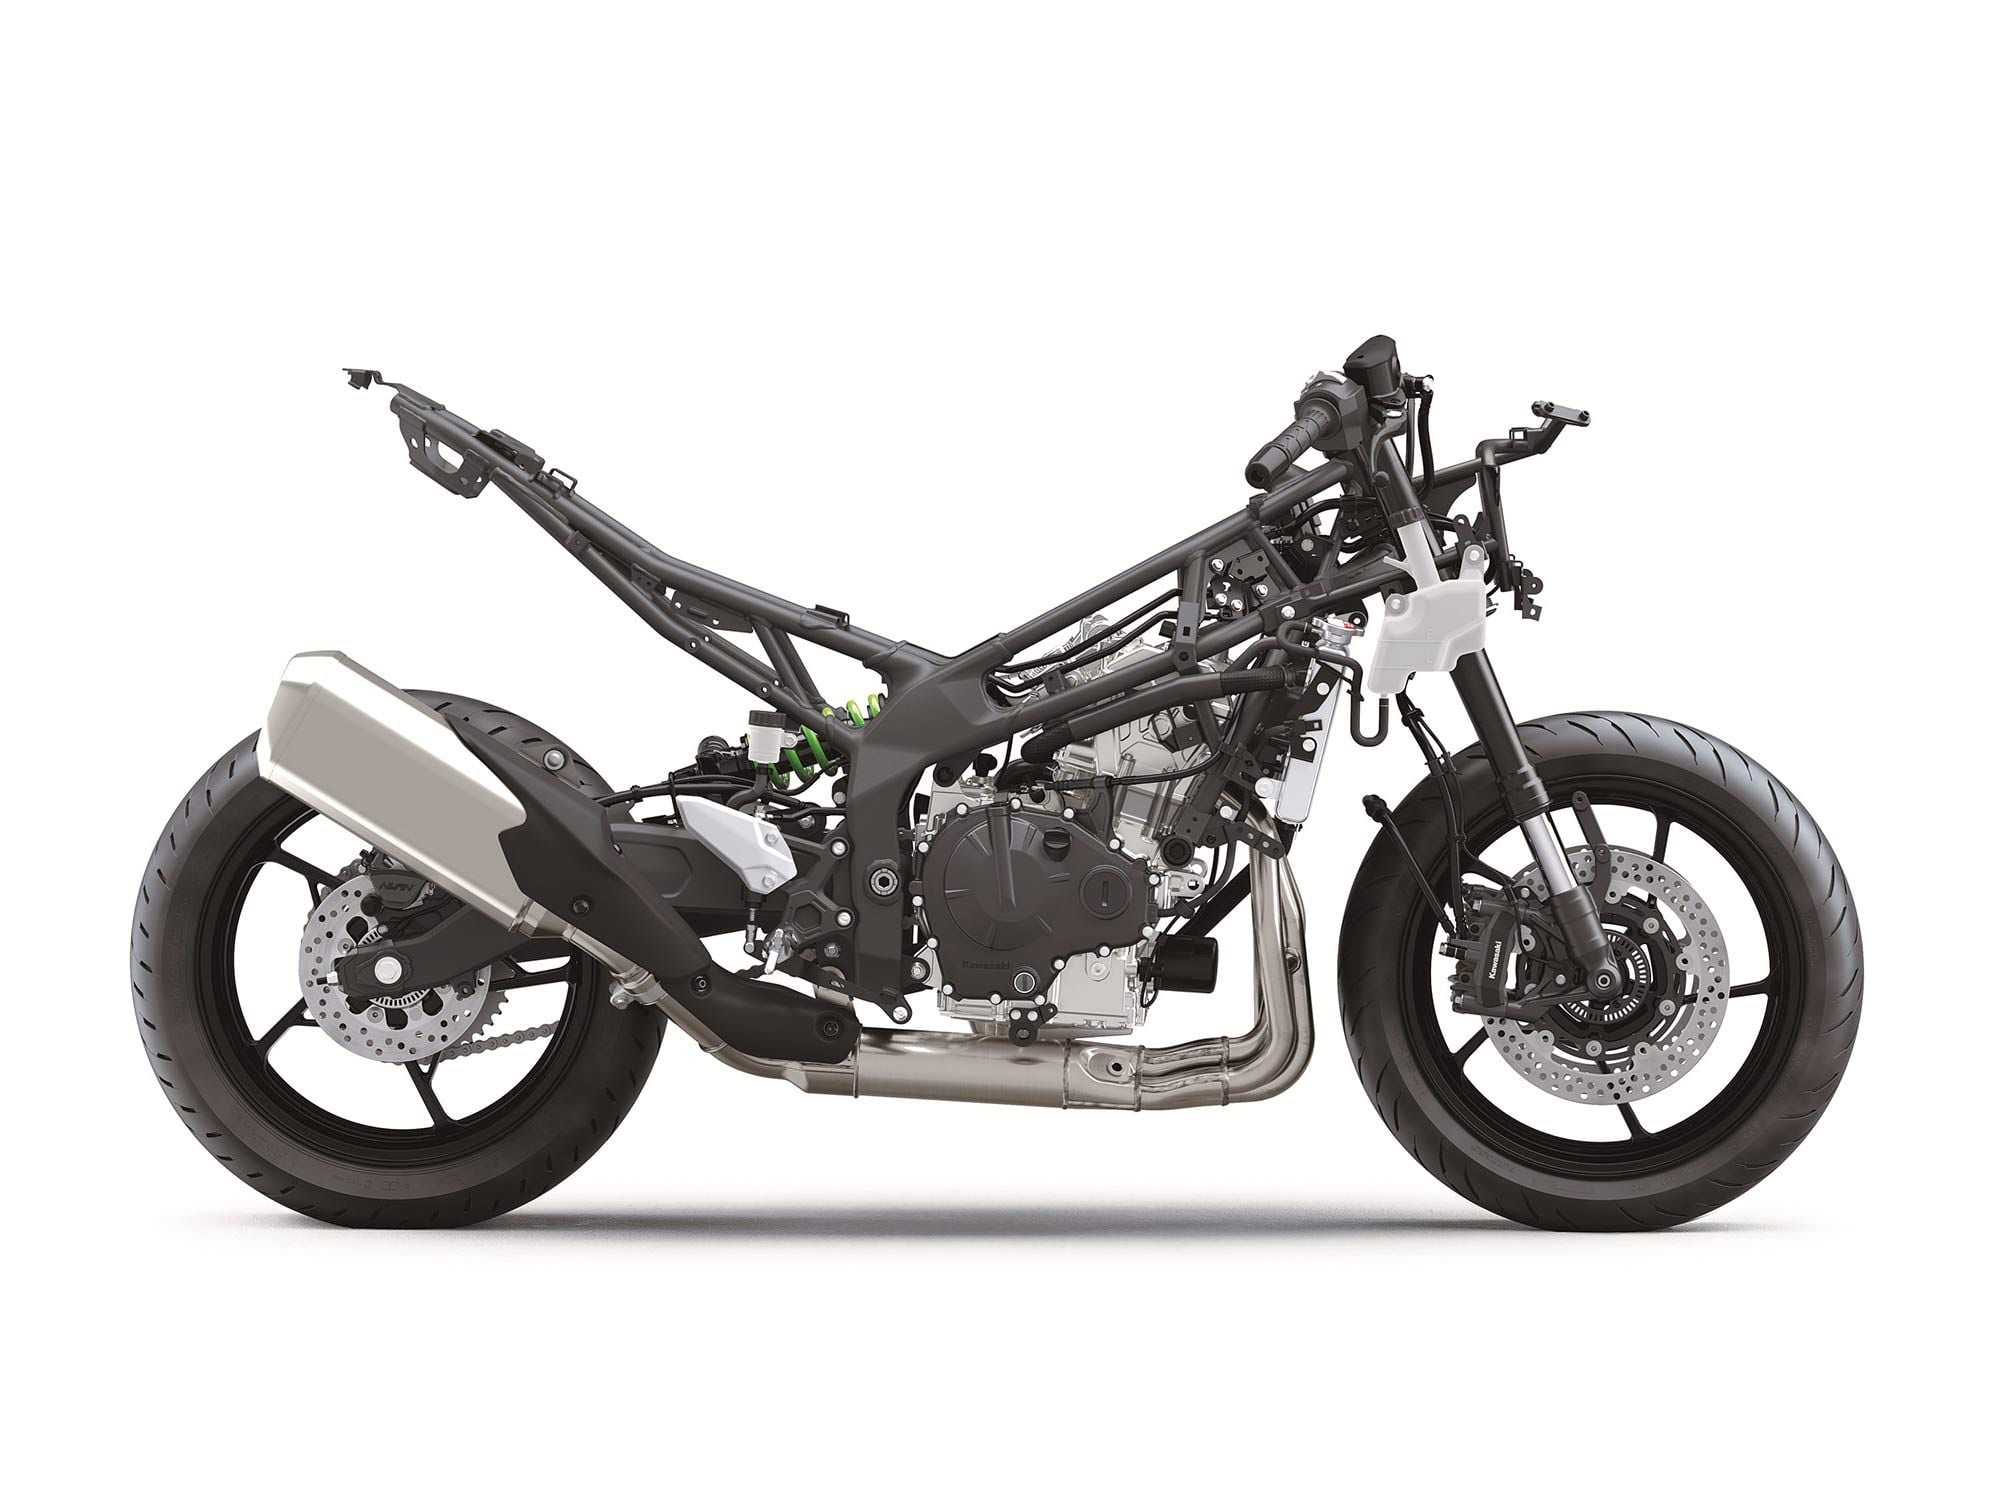 The ZX-4RR uses a cost-effective steel-trellis frame and a steel banana-style swingarm. The wheelbase measures 54.3 inches, identical to the Asian-market Kawasaki ZX-25R that the 4RR is largely based on.